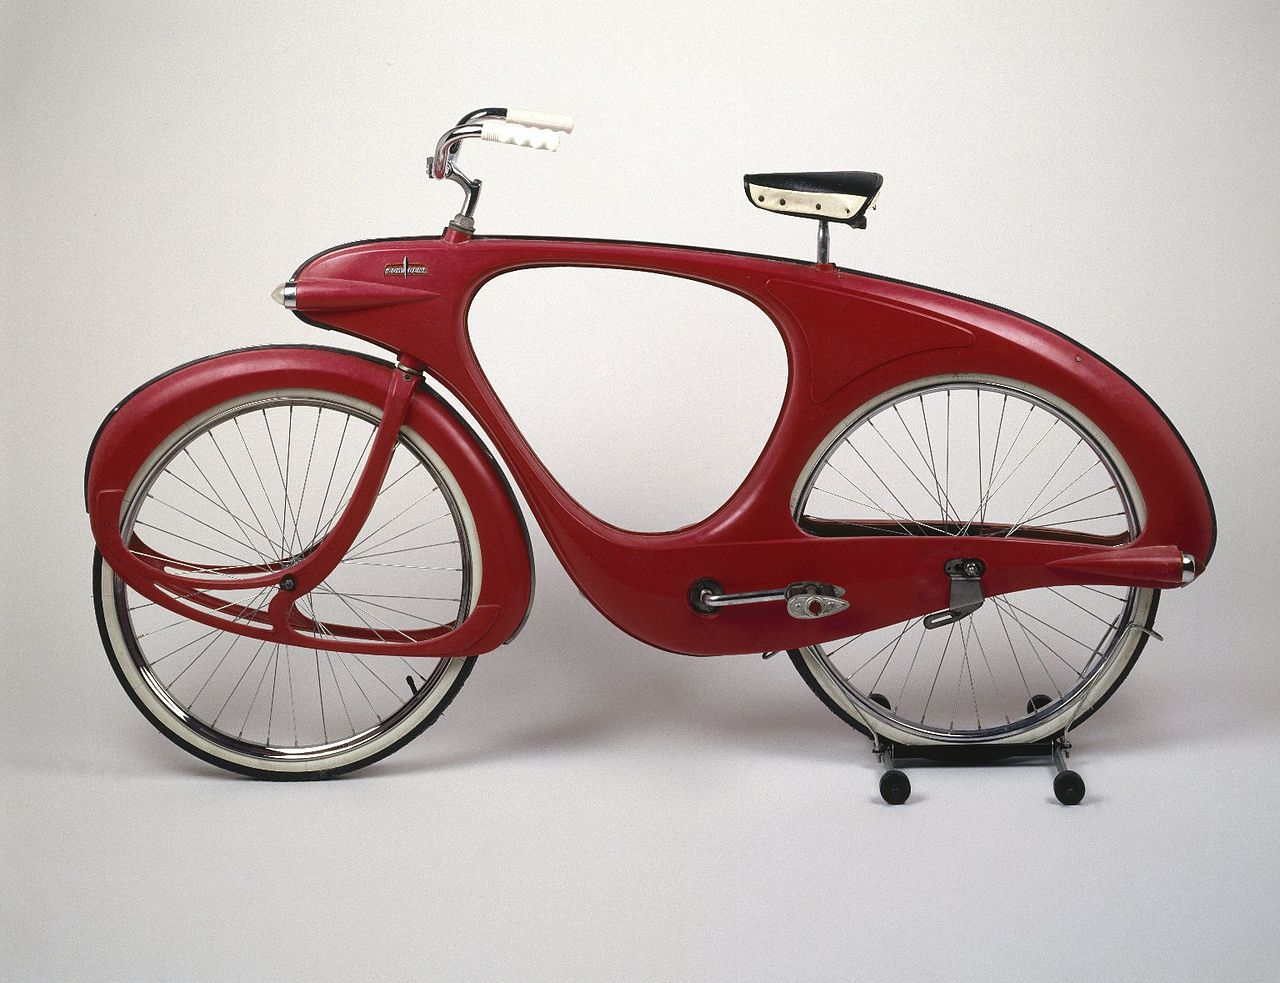 1960’s Bowden Spacelander, which missed the “too vast a departure” element of the MAYA principle. Design for the ages, total sales of 522.  Image via Creative Commons license by Brooklyn Museum.